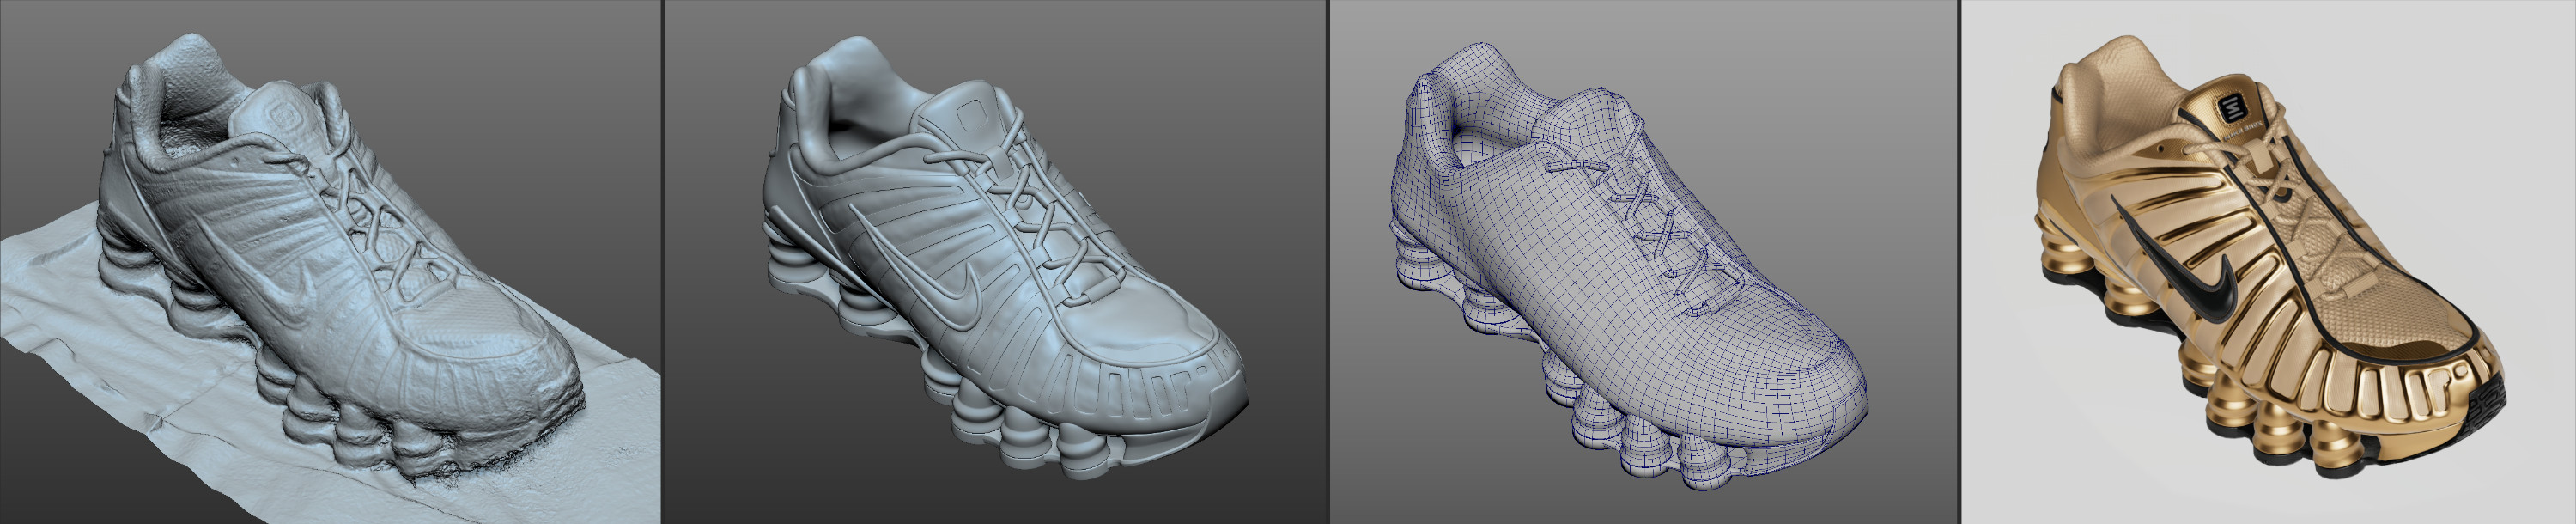 I started with a scan of a shoe which provided the basic silhouette and reference.